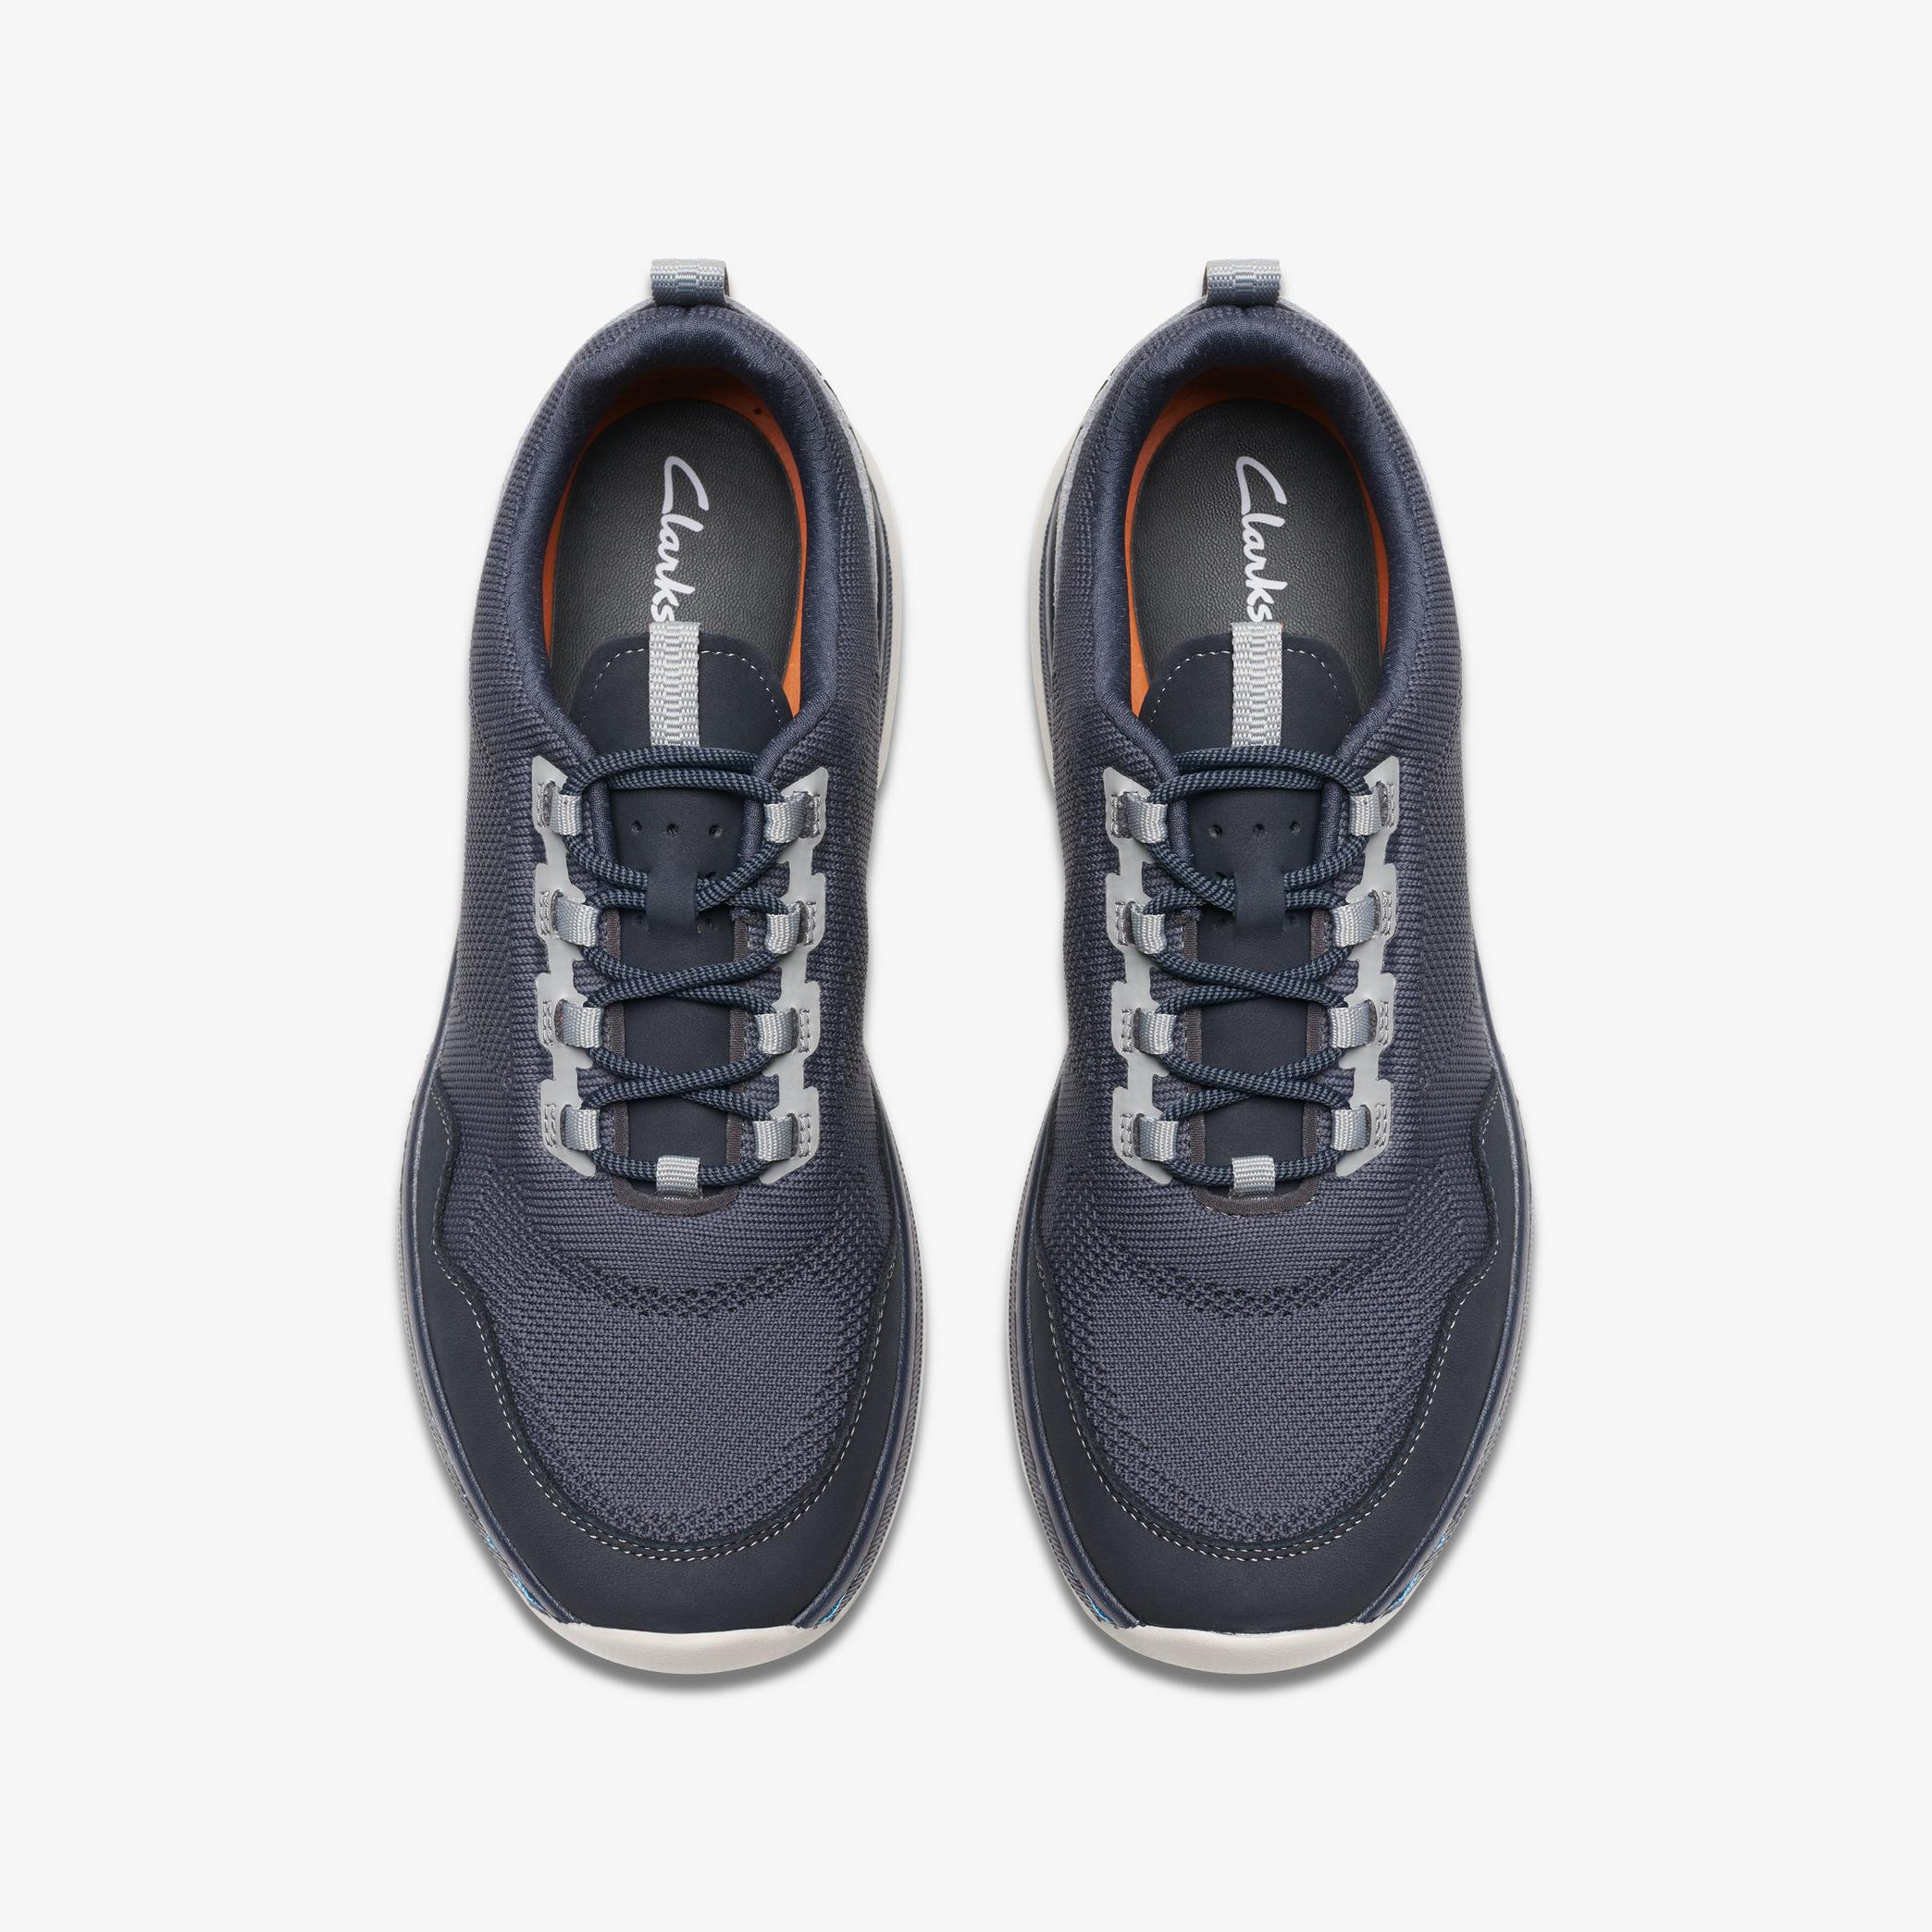 Clarks Pro Knit Navy Combination Trainers, view 6 of 6